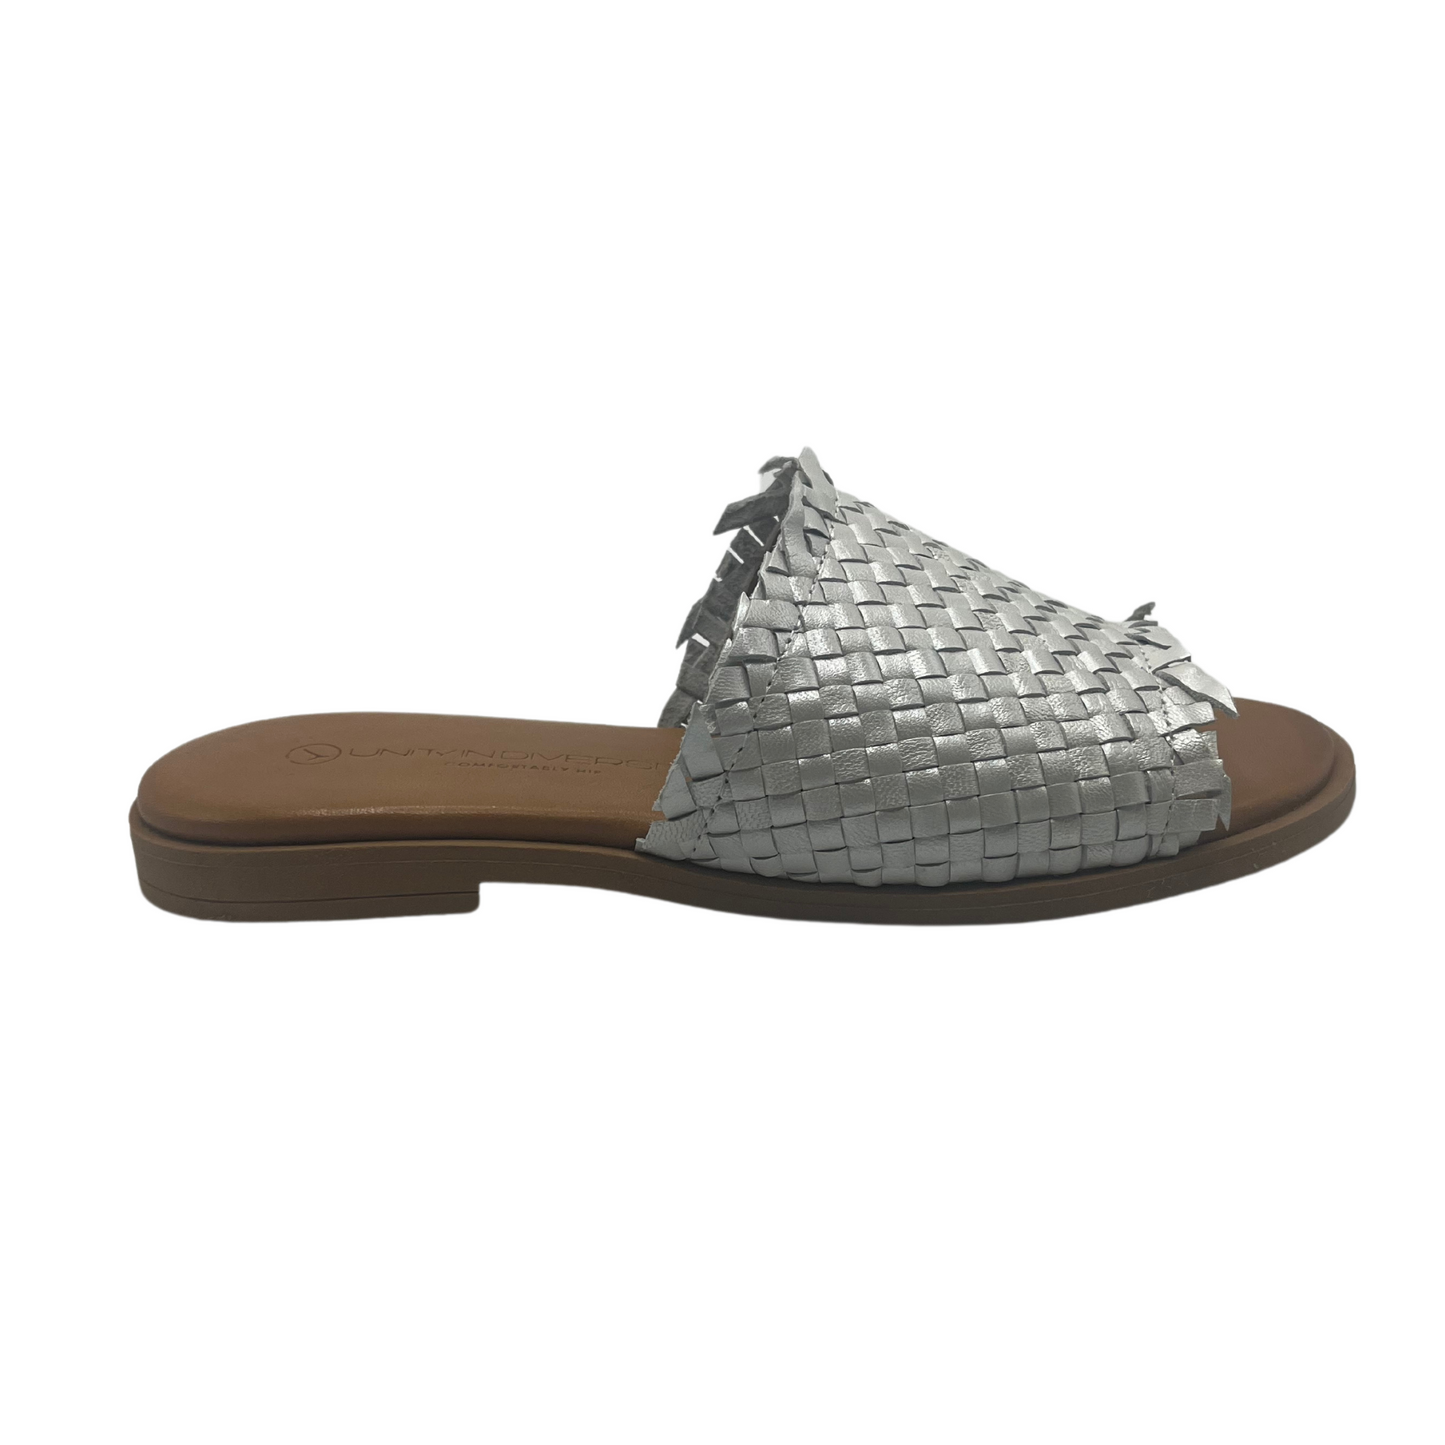 Right facing view of silver woven leather slip on sandals with lined footbed and low heel